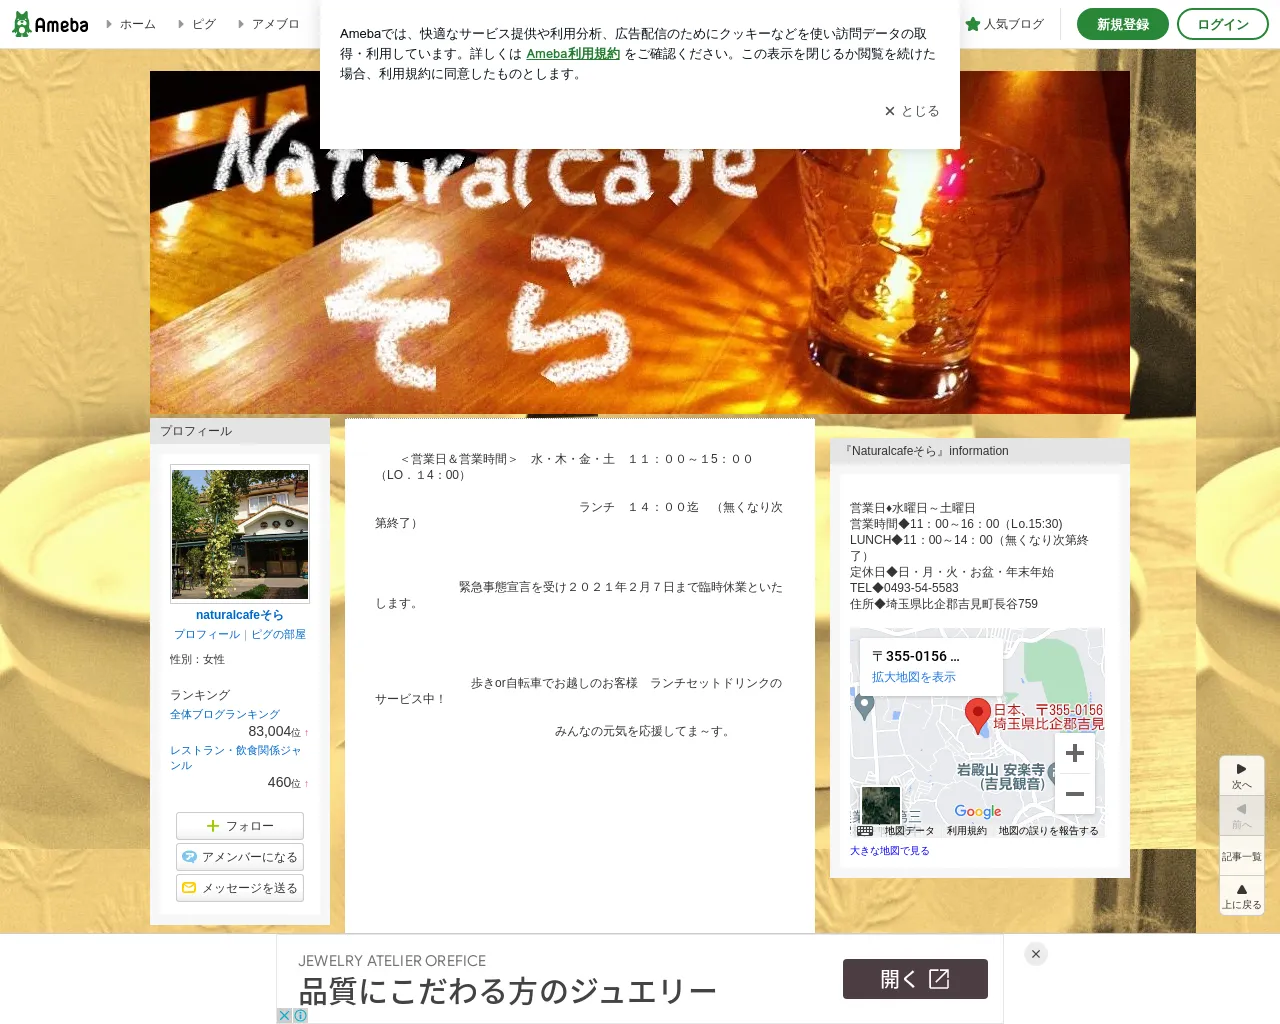 Naturalcafe そら site